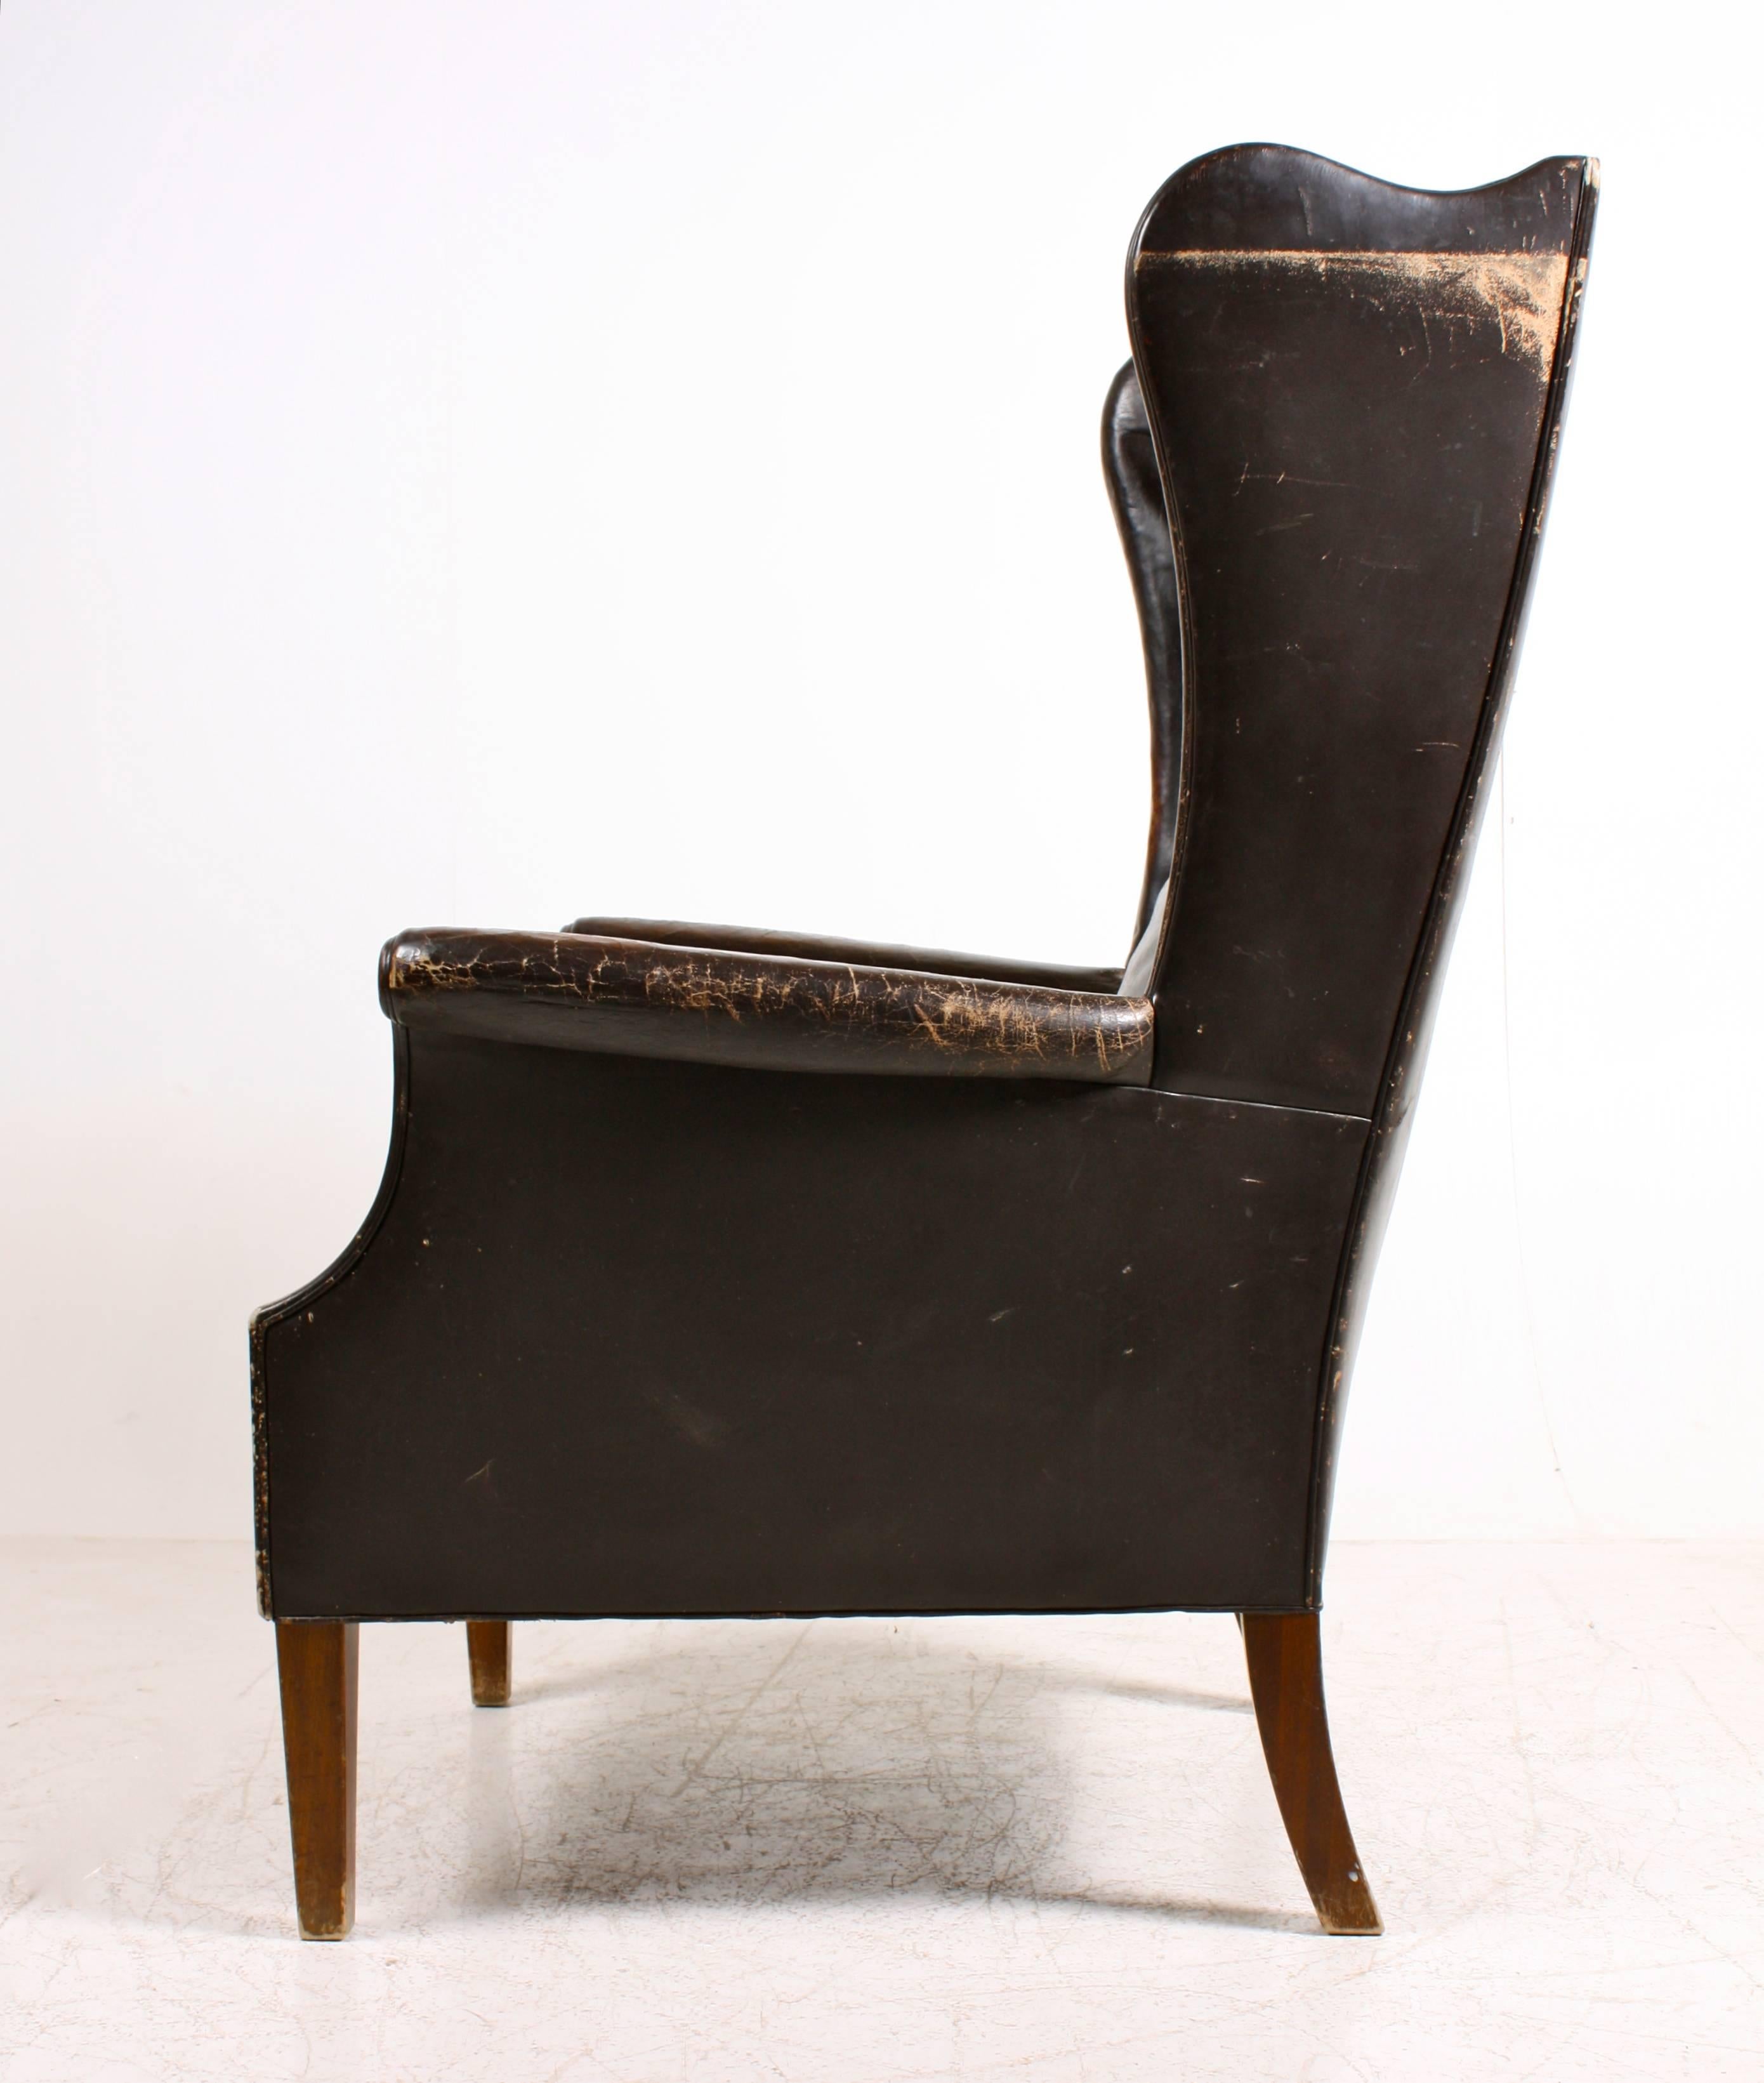 Decorative easy chair in very patinated leather, Danish, 1940s.